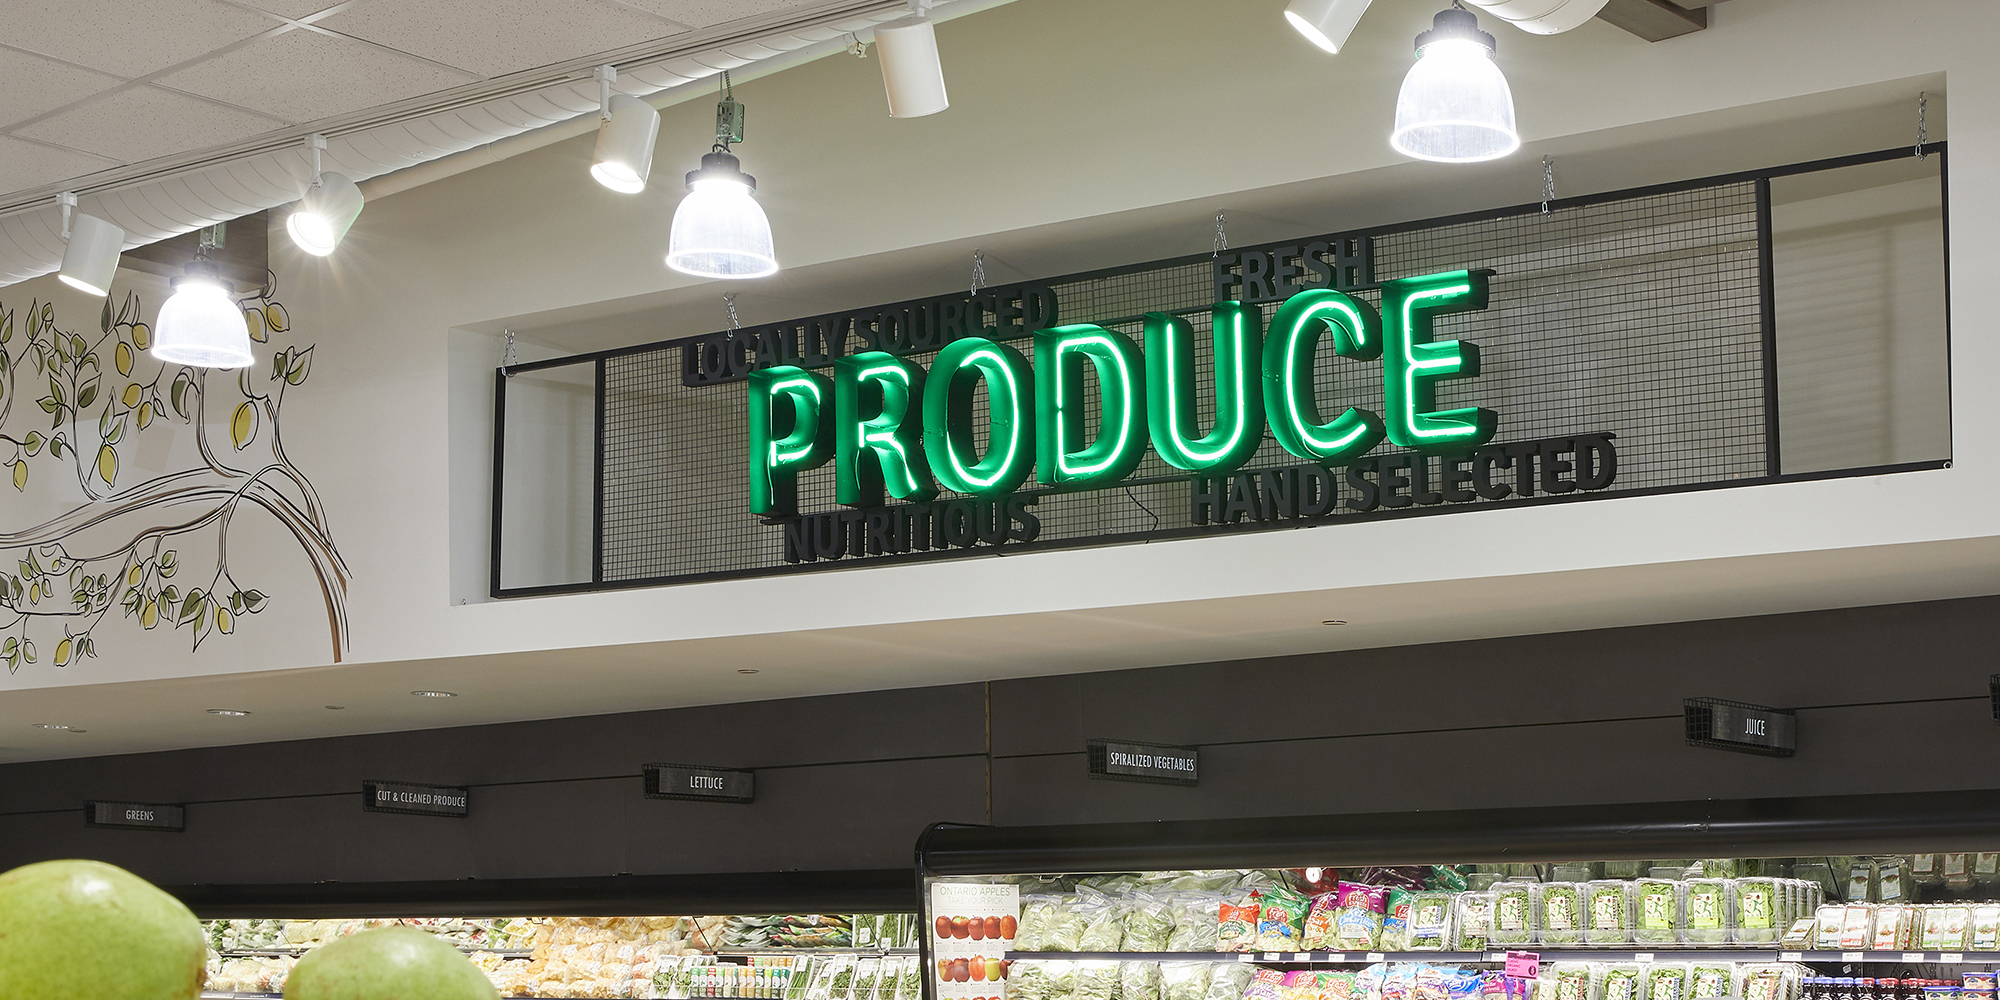 A neon produce sign in a grocery store.